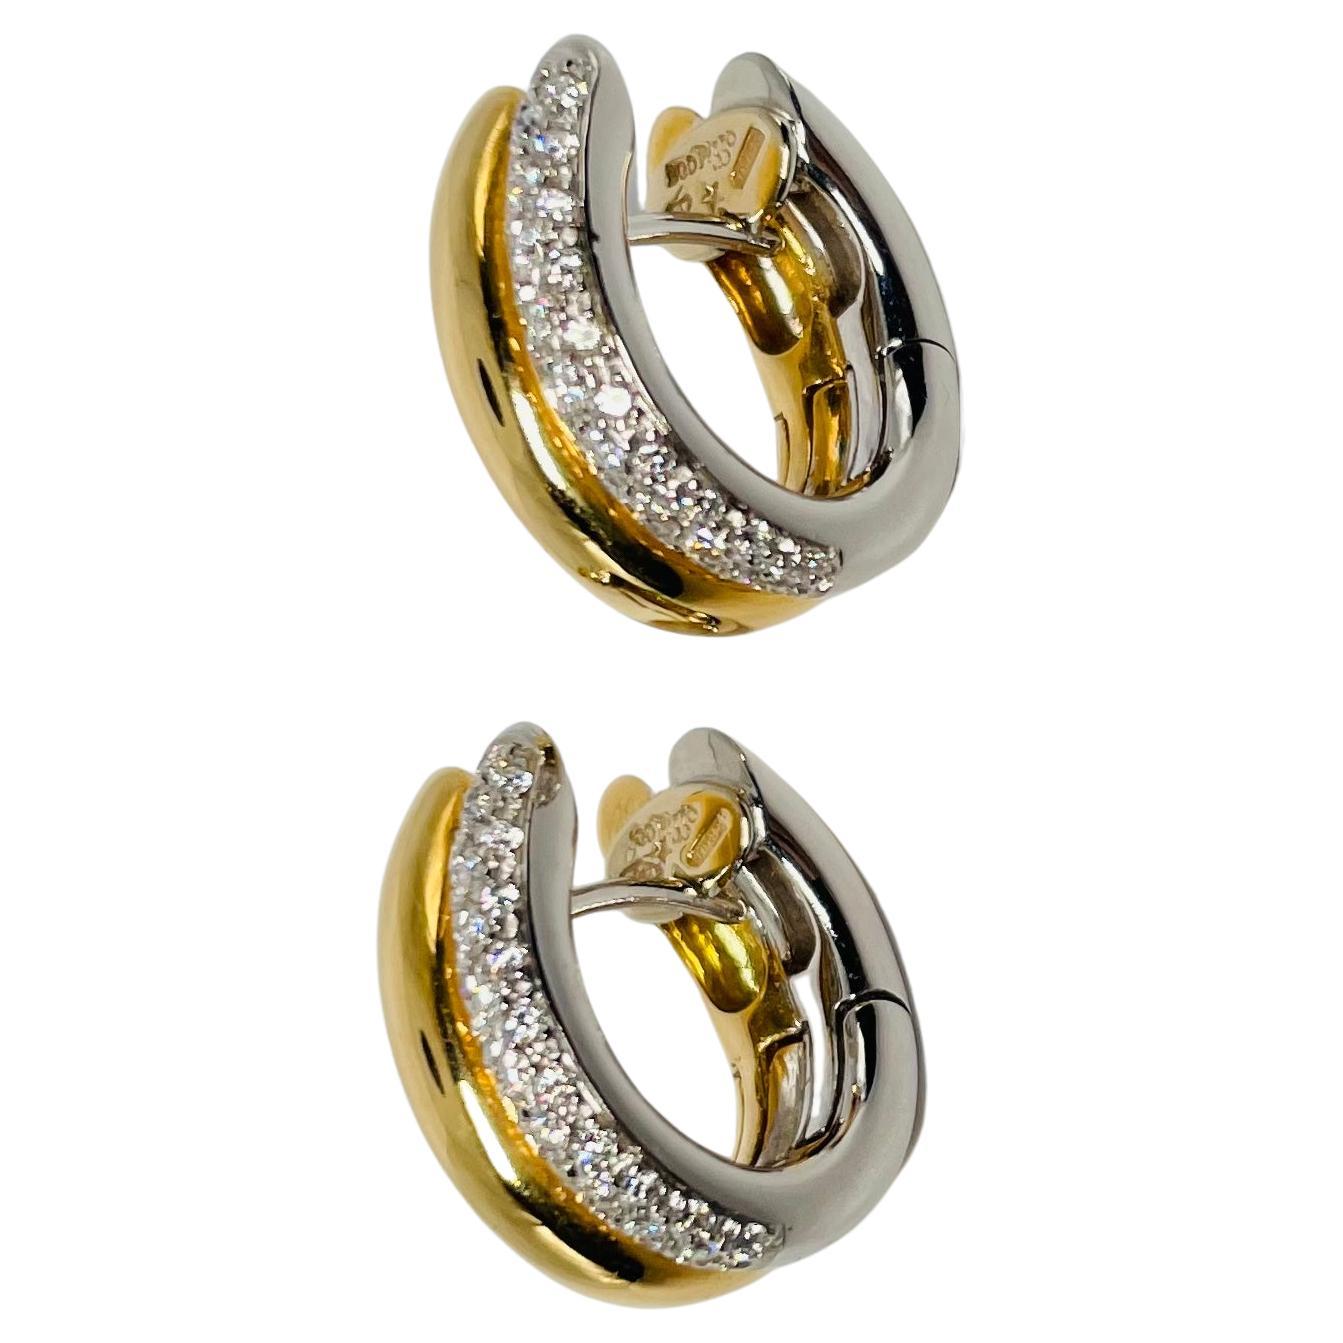 Leo Pizzo 18k White and Yellow Gold Diamonds Pair of Hoop Earrings For Sale